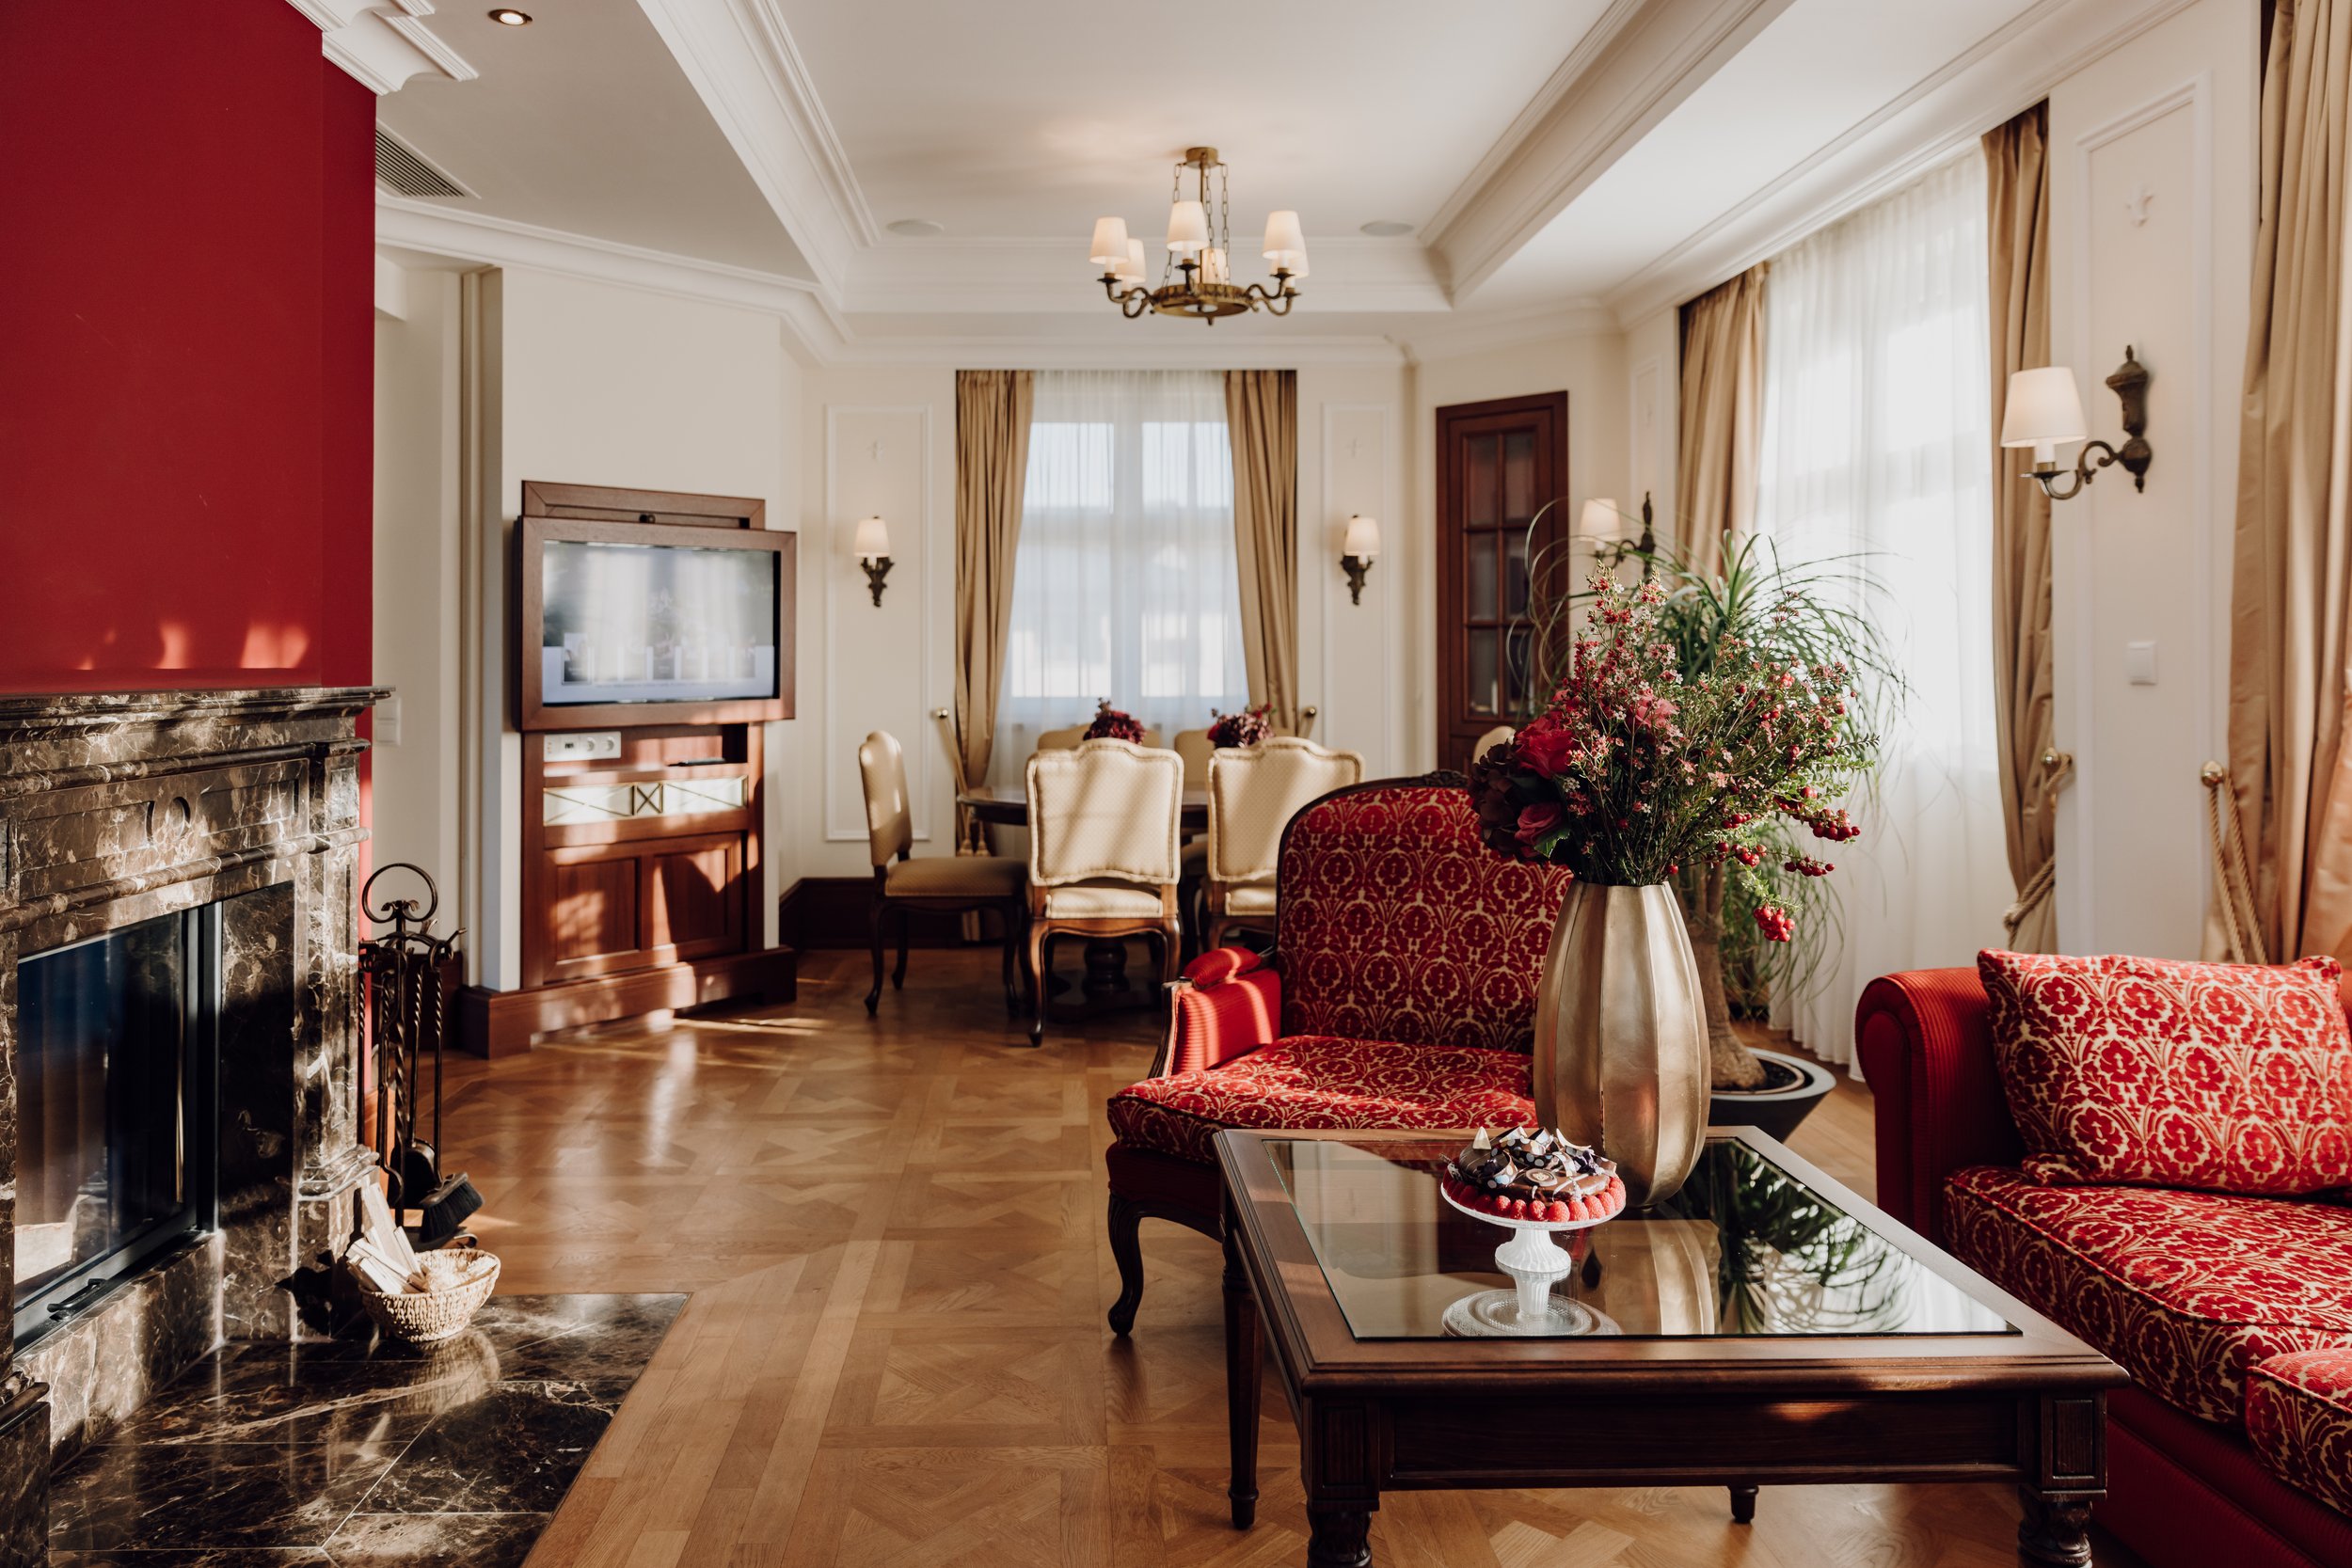 Sitting area of a suite at Schloss Fuschl, a hotel in the Marriott Luxury Collection in Salzburg, Austria